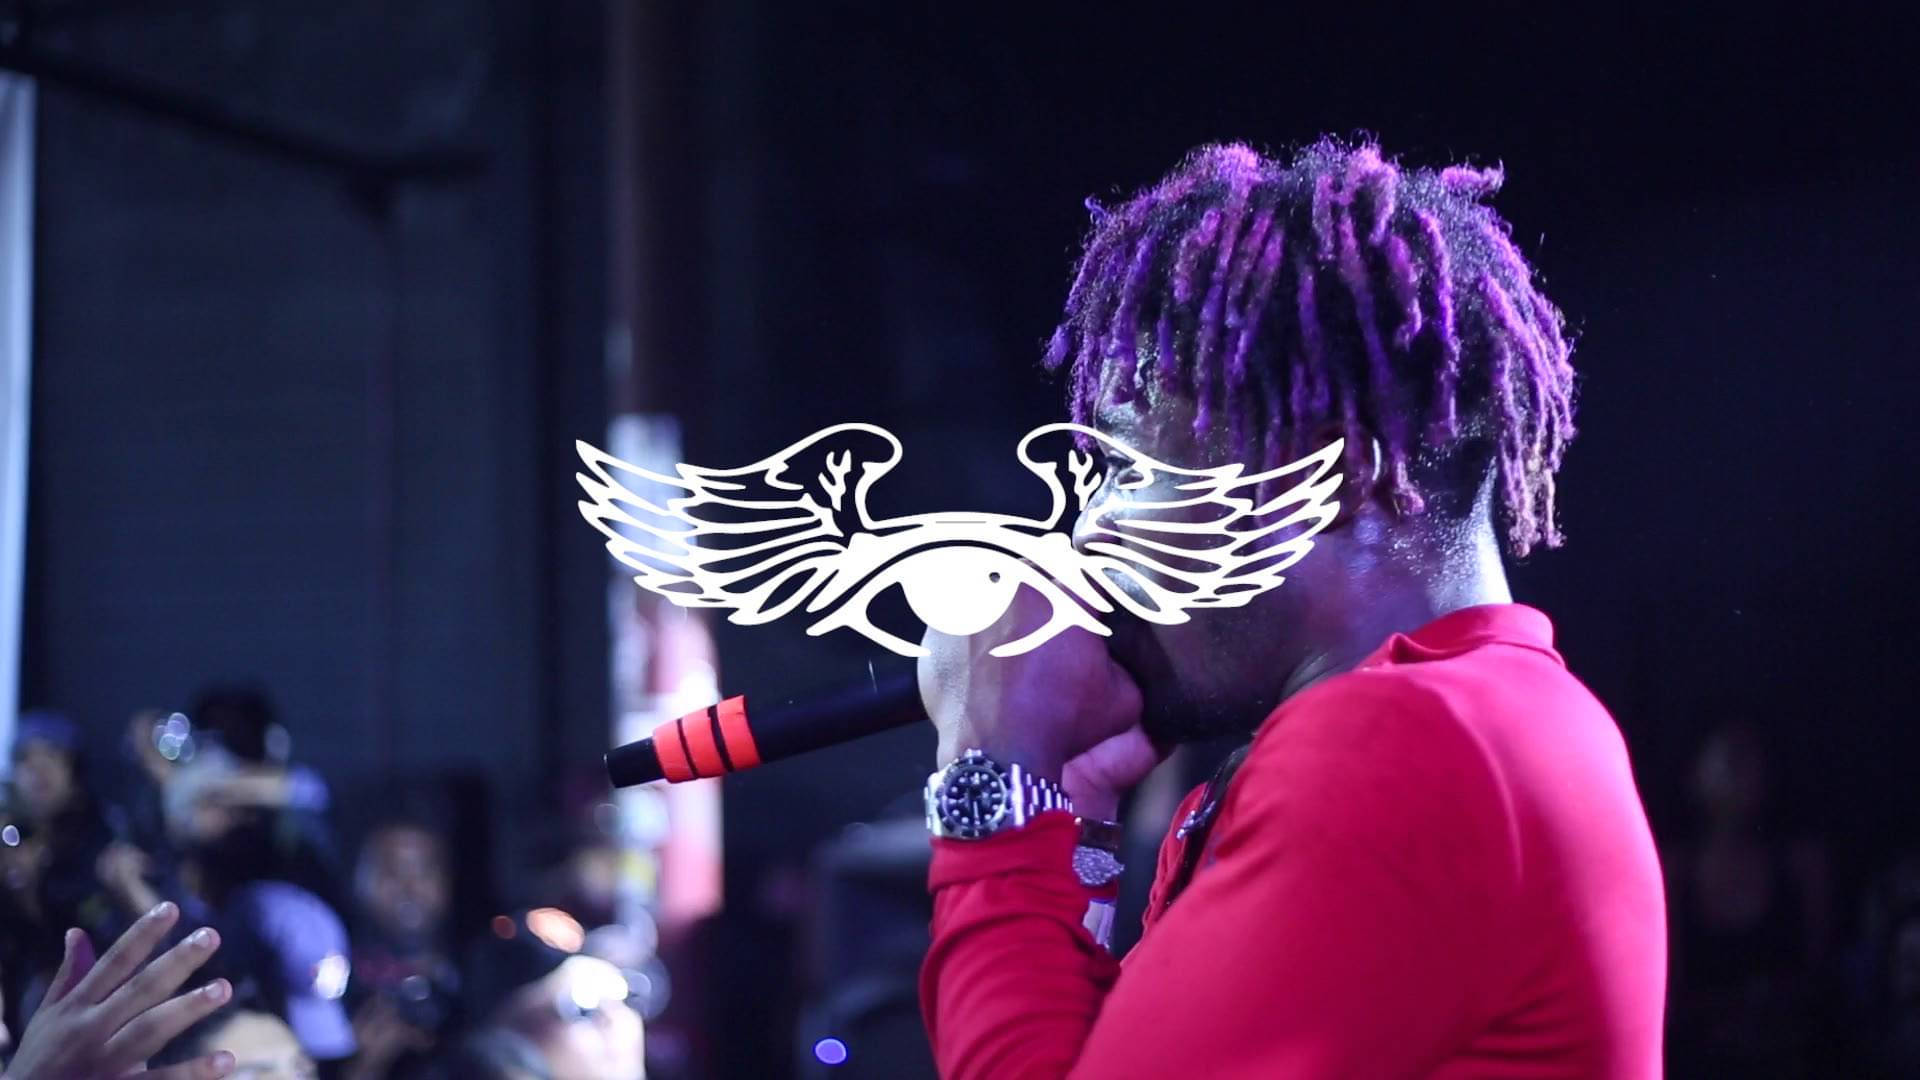 Lil Uzi Vert putting on an electrifying show in front of a hyped-up crowd Wallpaper